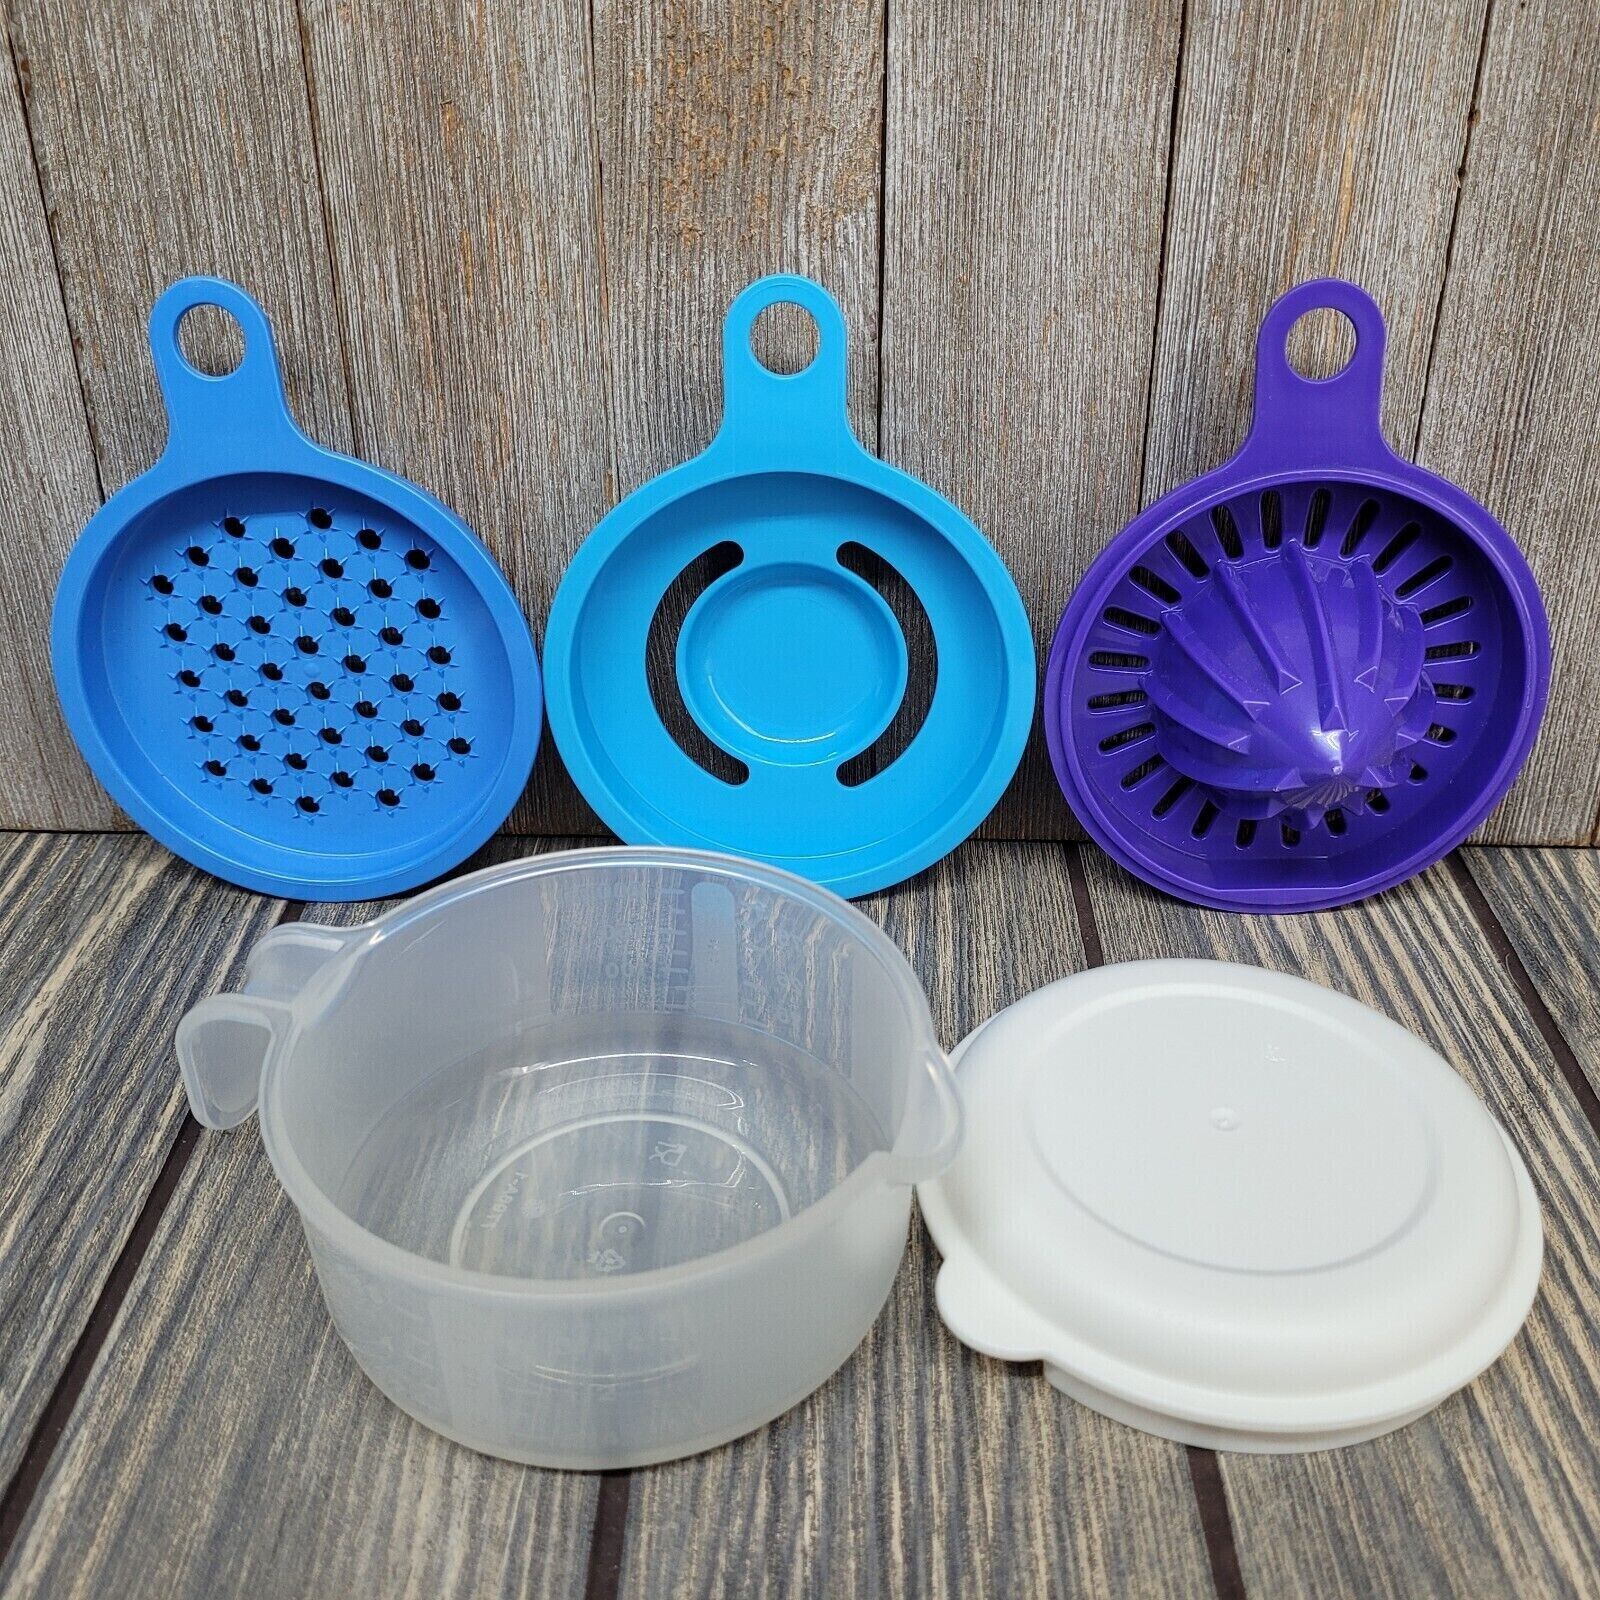 Tupperware All-in-One Juicer/Grater/Egg Separator Measuring Cup Cooks Maid Set